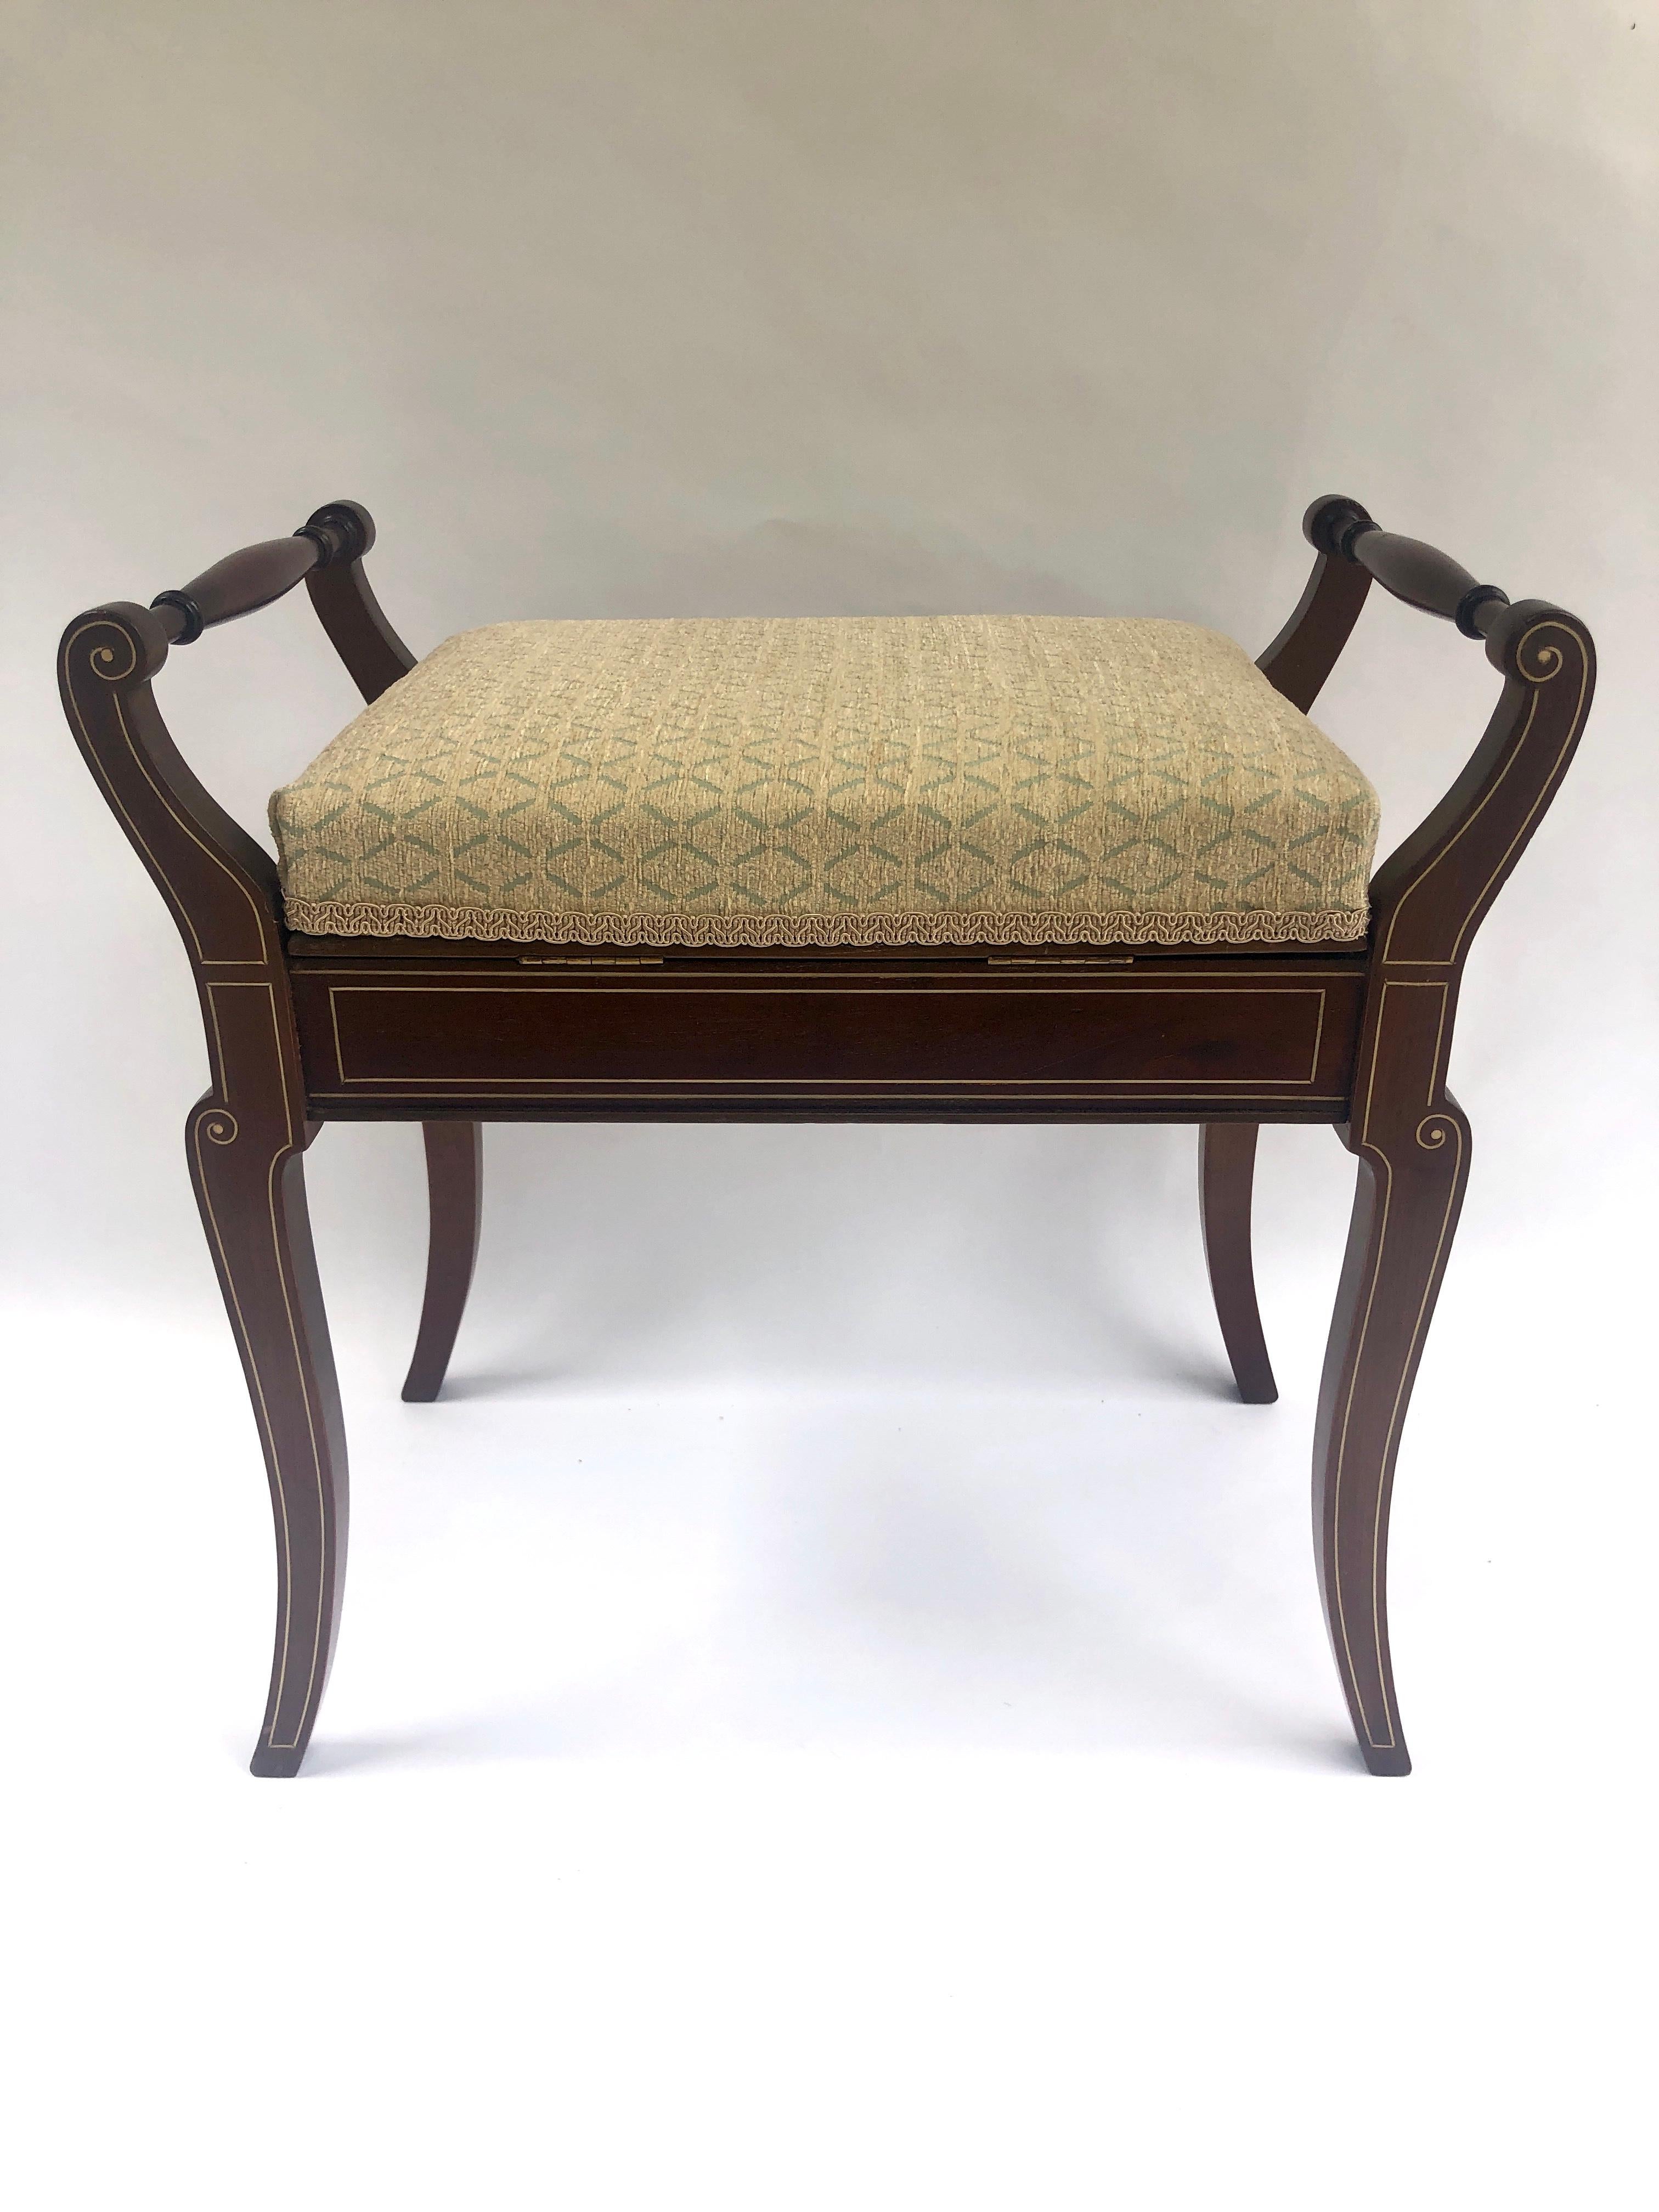 This is an exceptionally attractive antique Victorian mahogany freestanding inlaid piano stool with turned carrying handles. It features a reupholstered lift up seat revealing a storage area and pretty frieze with shell and stringing inlay, standing